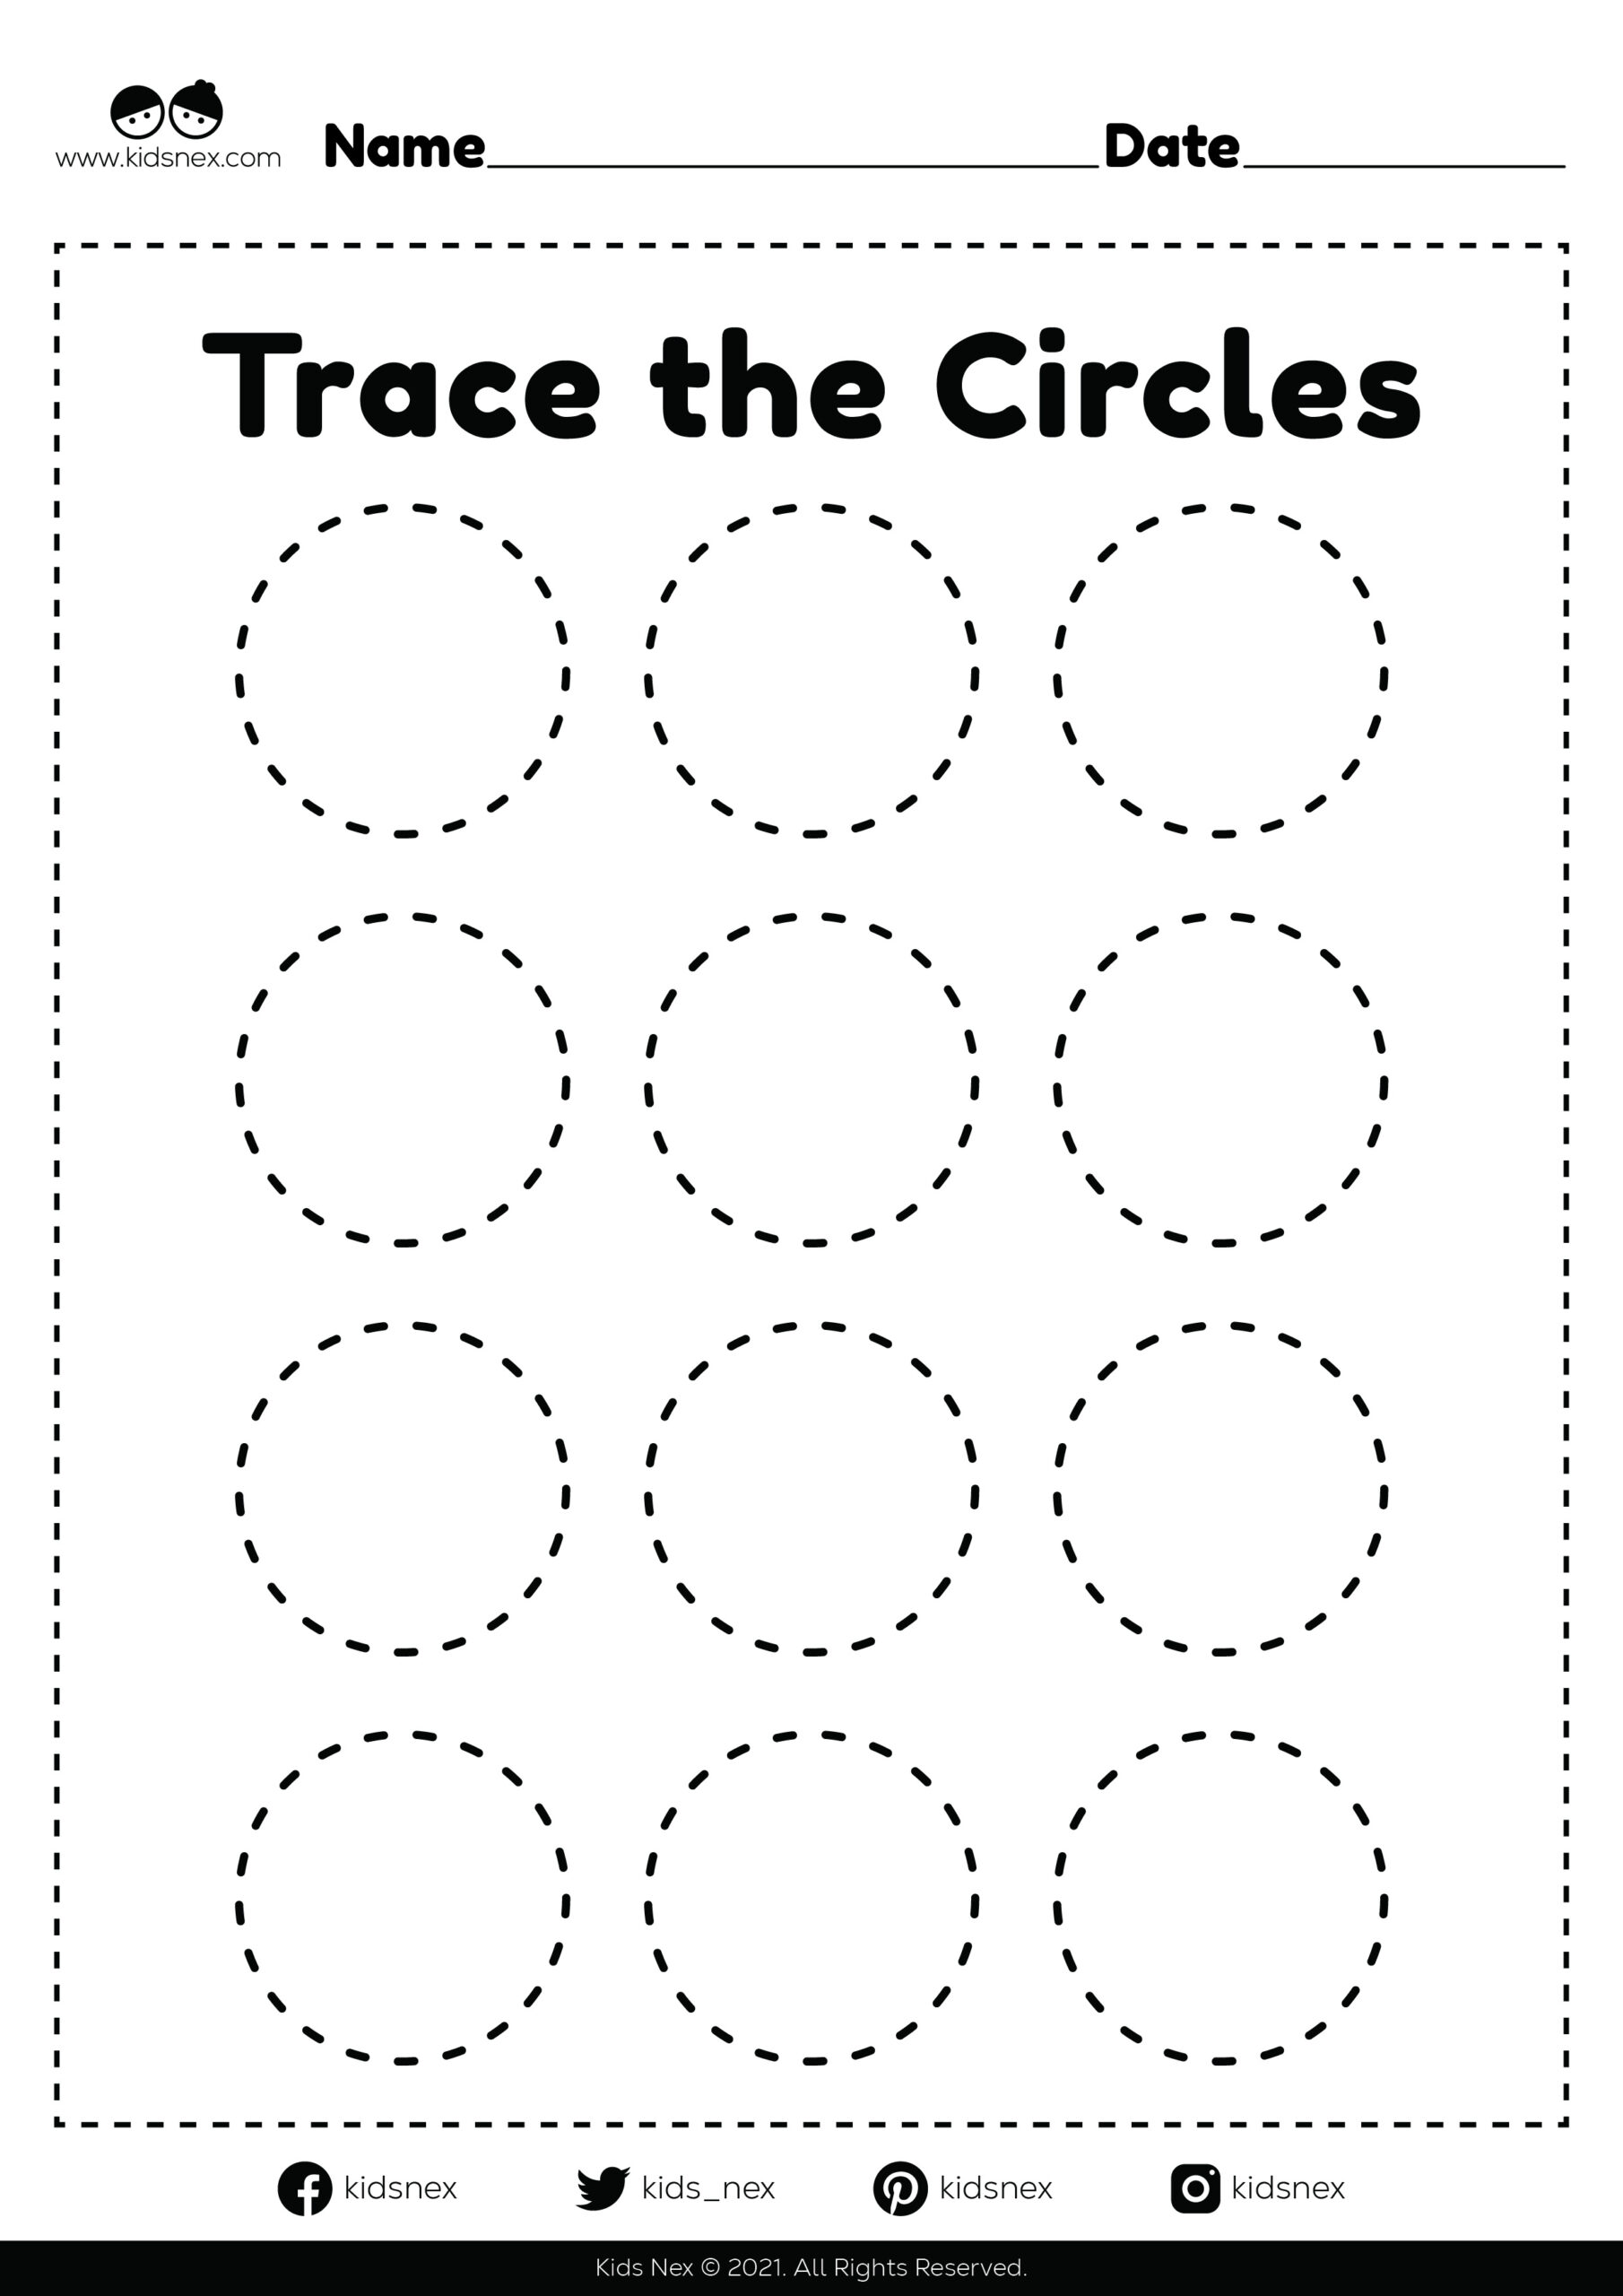 Tracing circles for kids educational worksheet for kindergarten and preschoolers for easy and fun activities in a printable illustration file format.